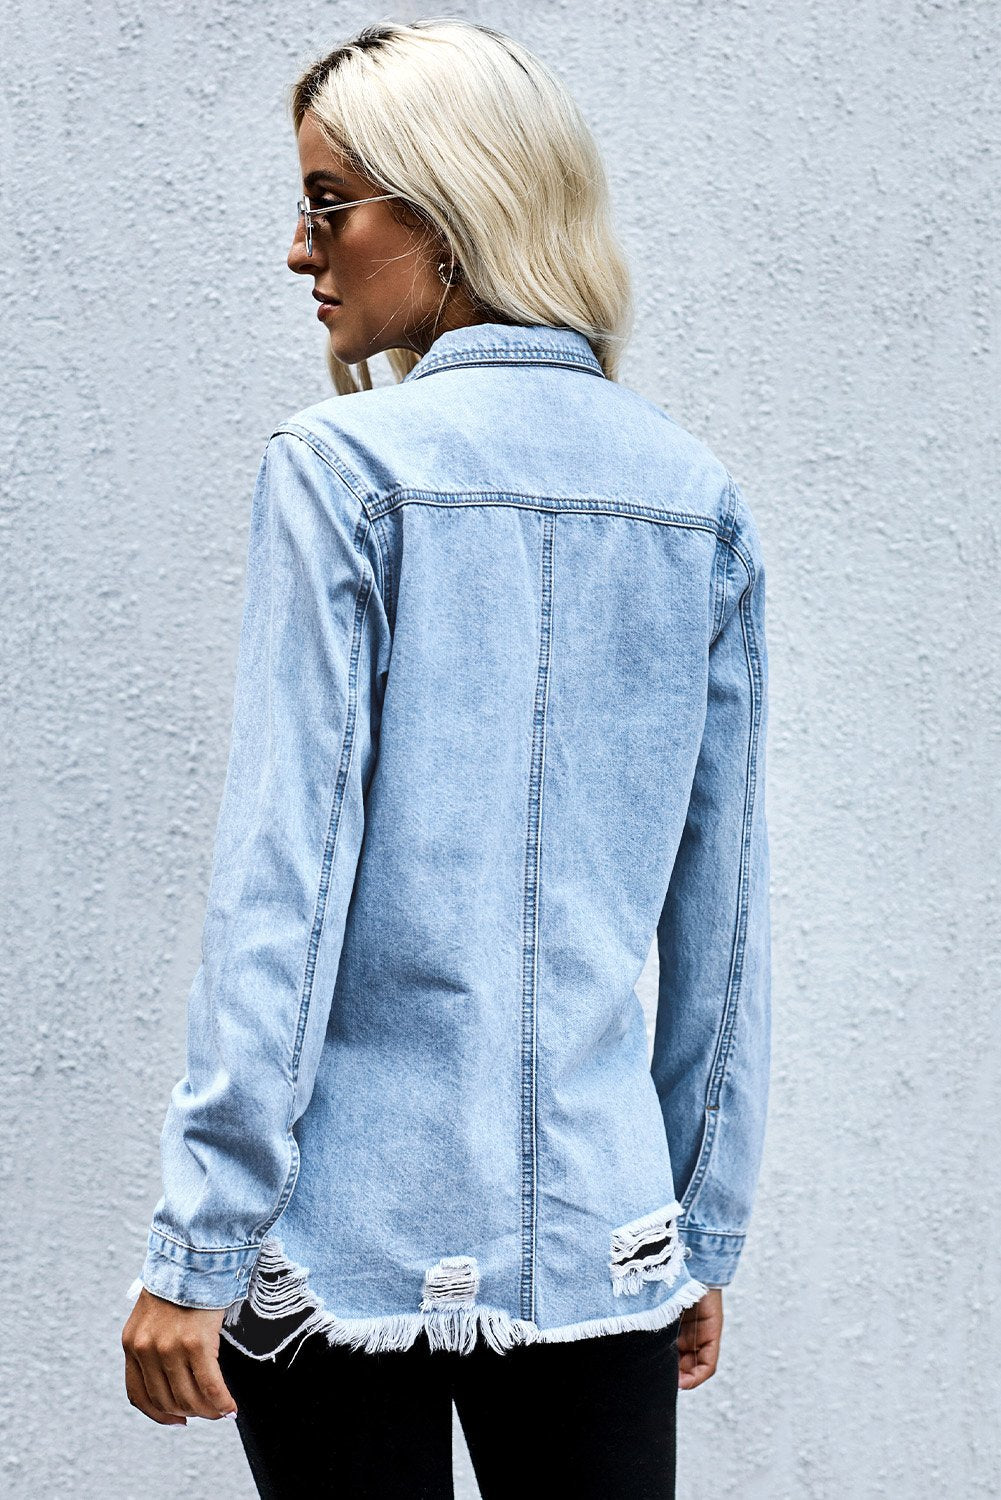 Blue Ripped Denim Jacket - All Good Laces